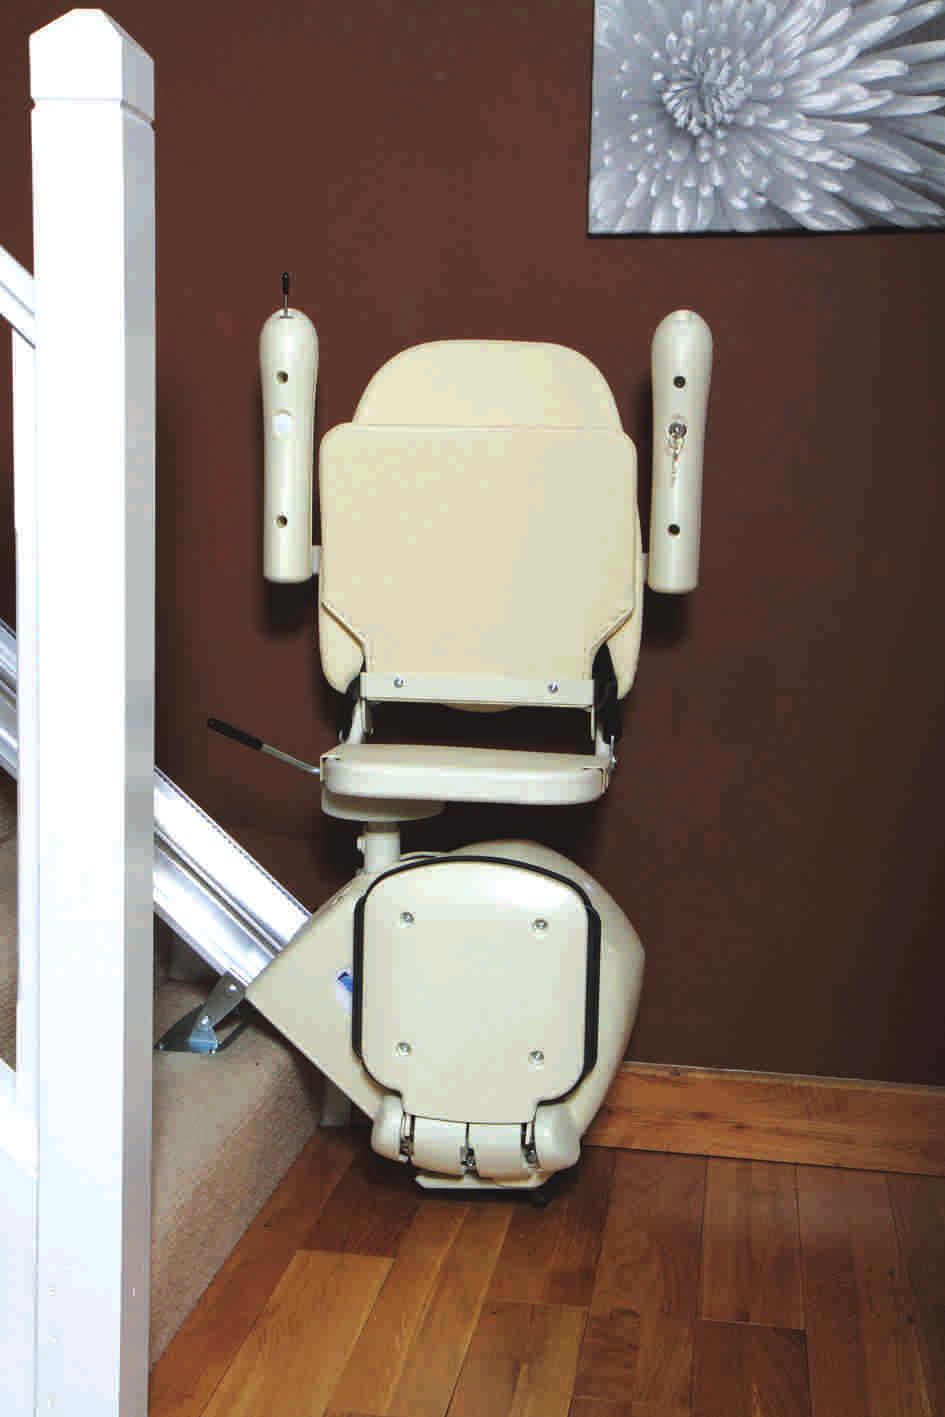 The MediTek E120 Stairlift A new economical, entry level, stairlift for those who need nothing more than a